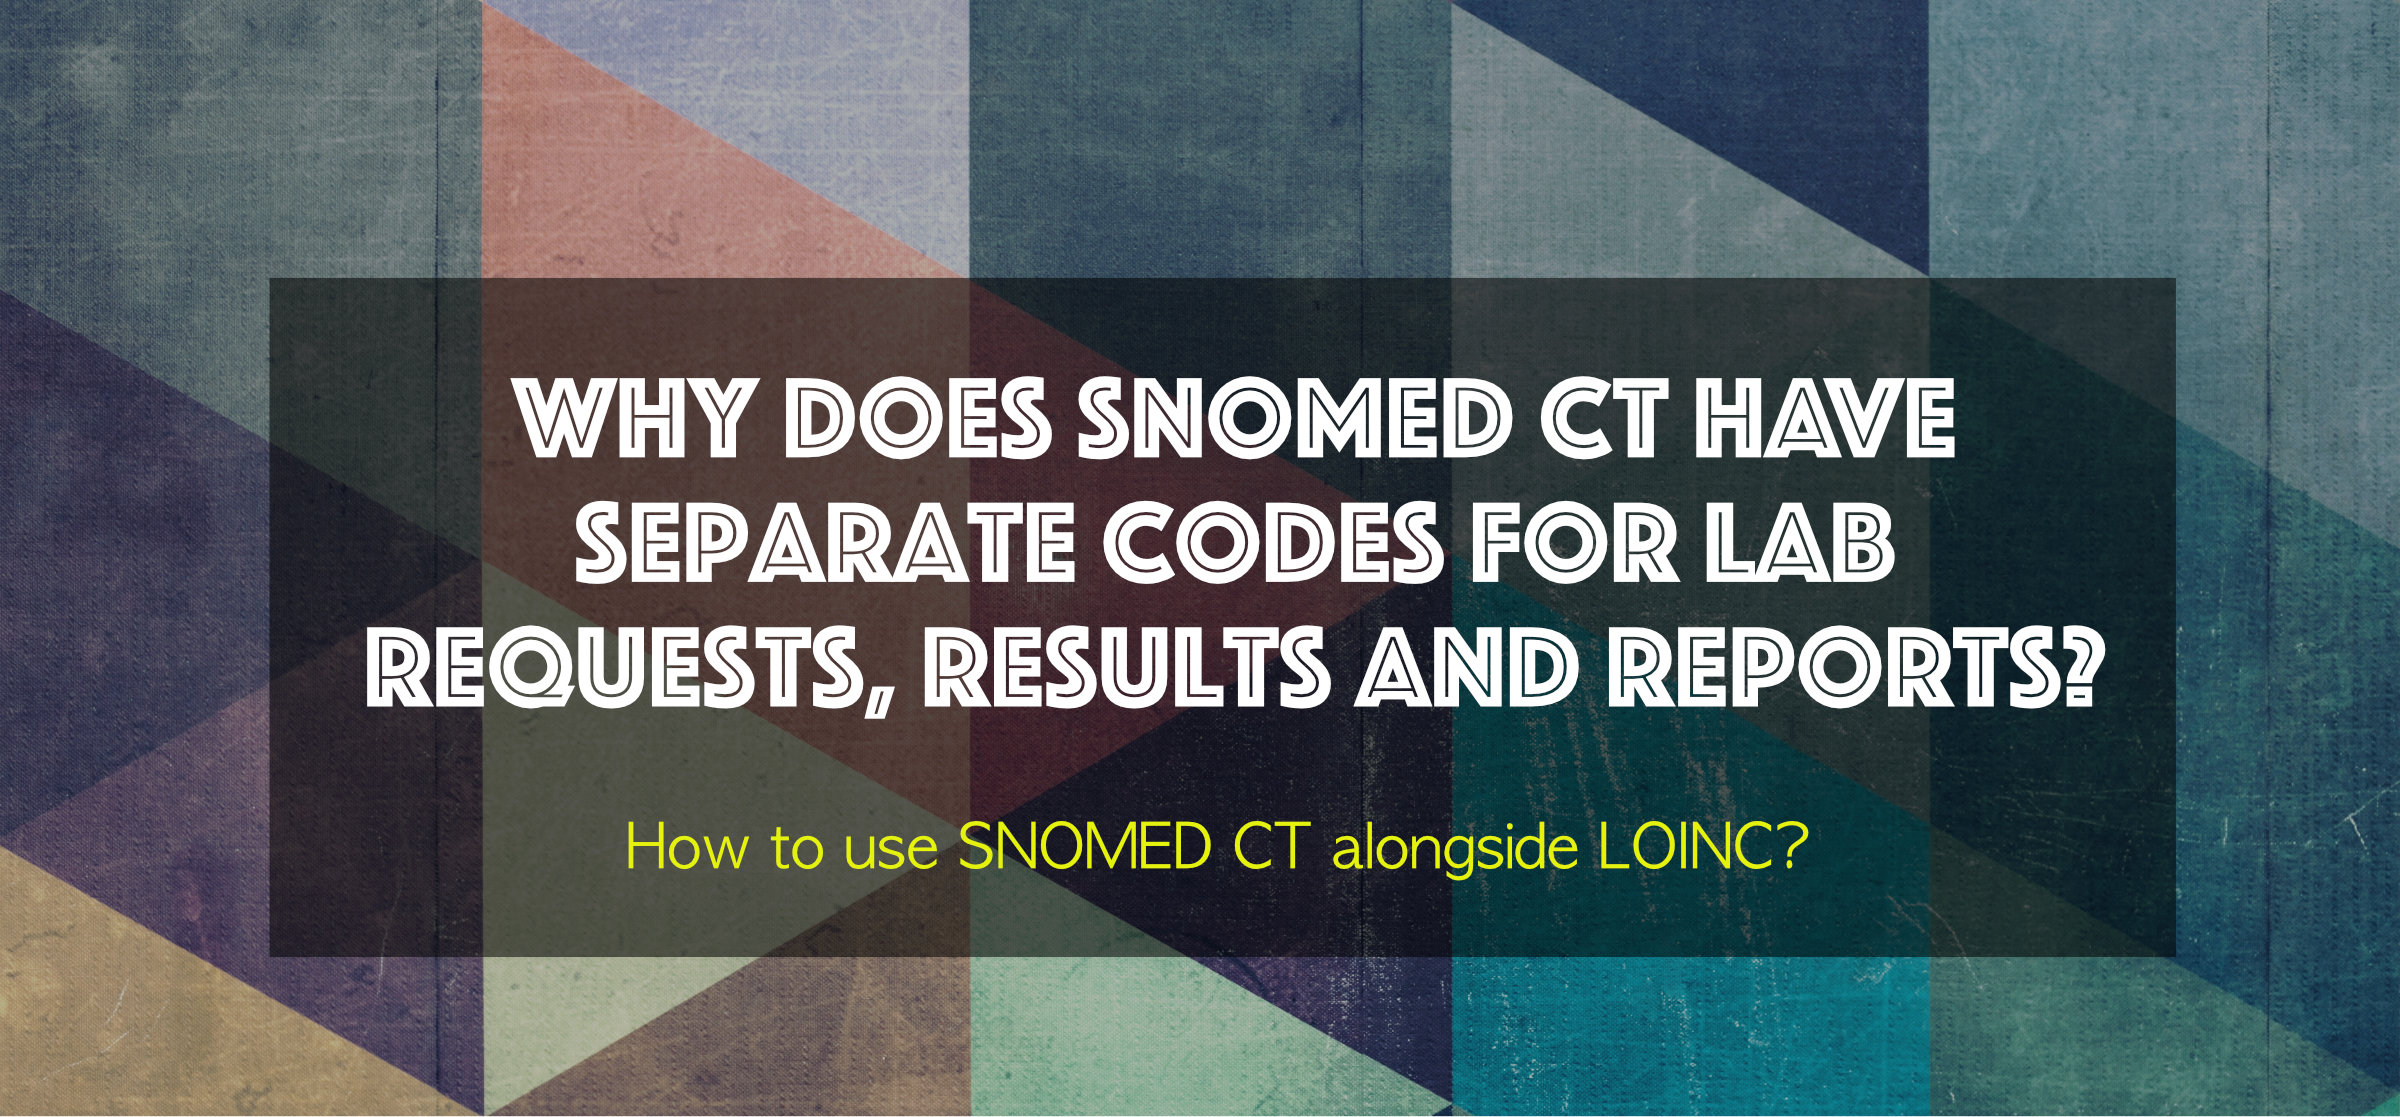 Why does SNOMED CT have separate codes for Lab Test Requests, Results and Reports? — Part 2